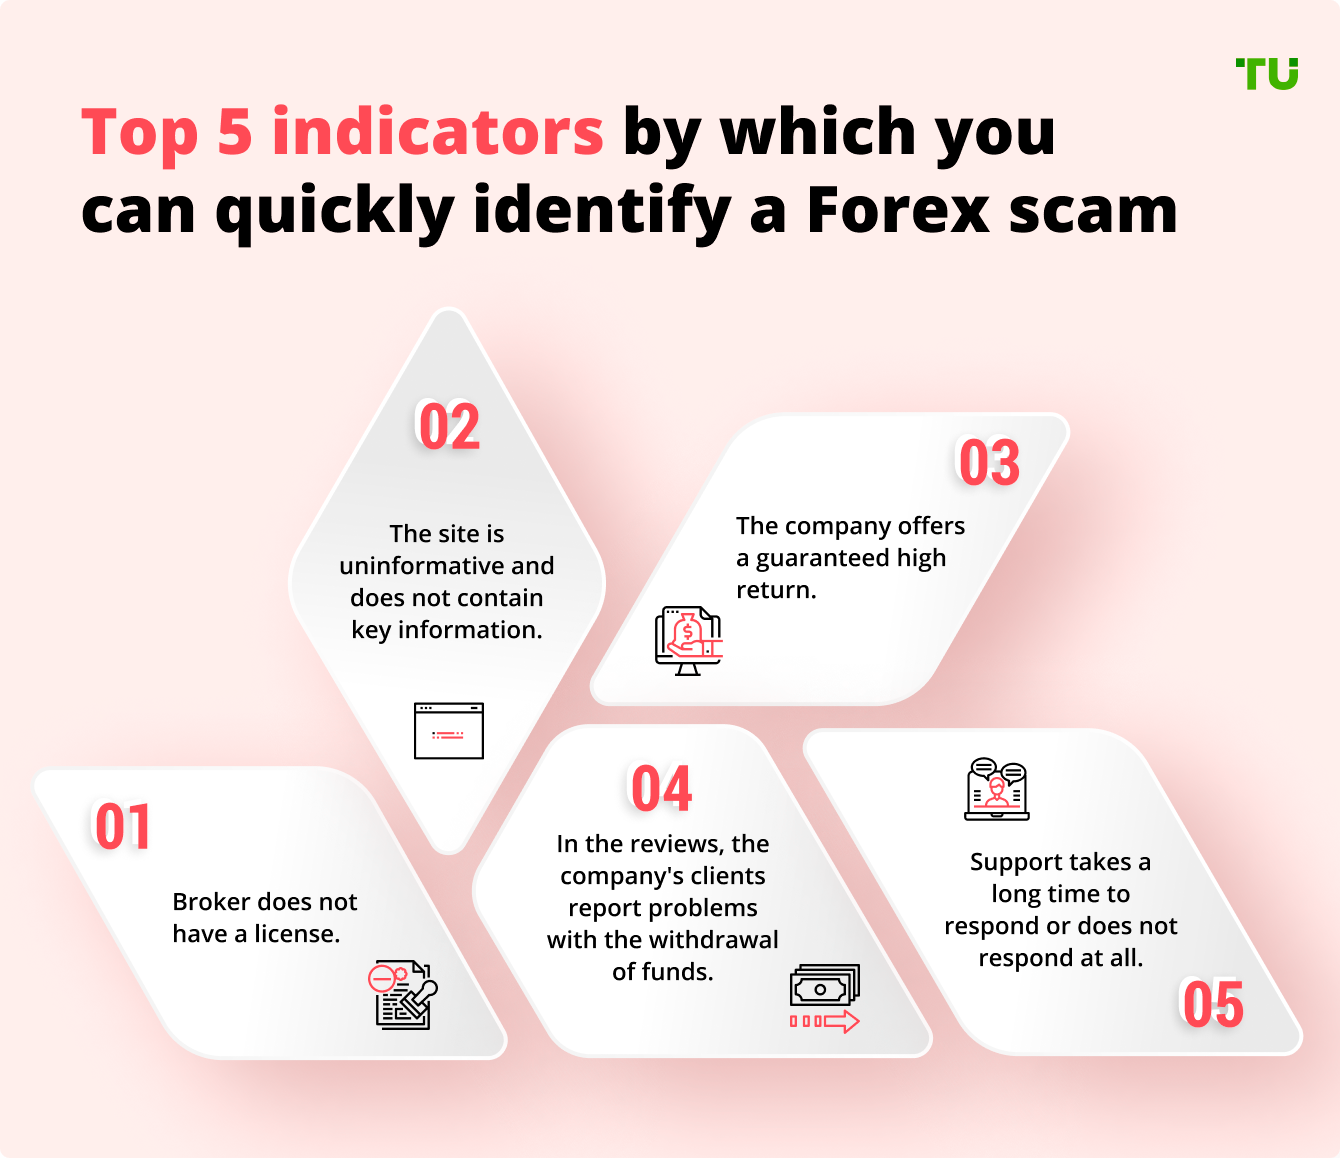 Indicators by which you can identify a Forex scam